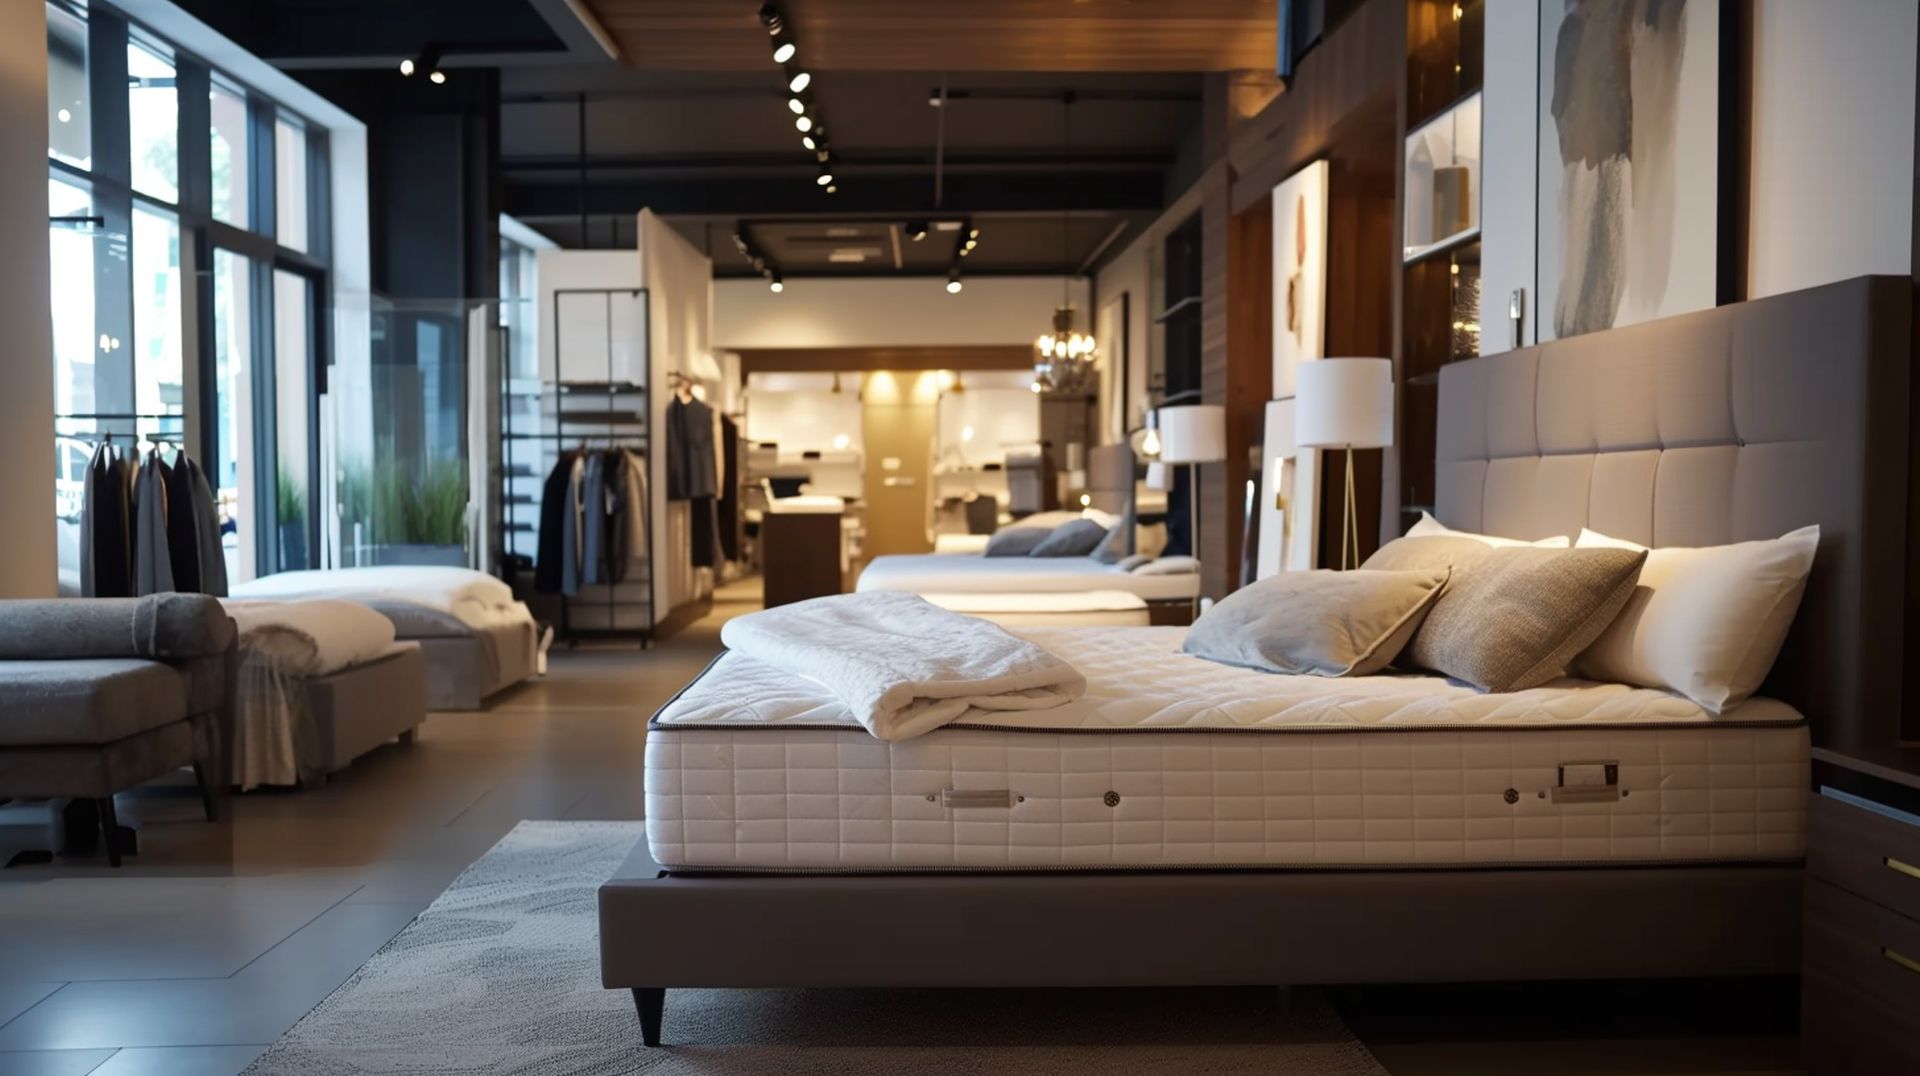 If you're looking for a new bed, mattress stores in San Clemente offer the best customer and delivery service, financing, and warranties in California